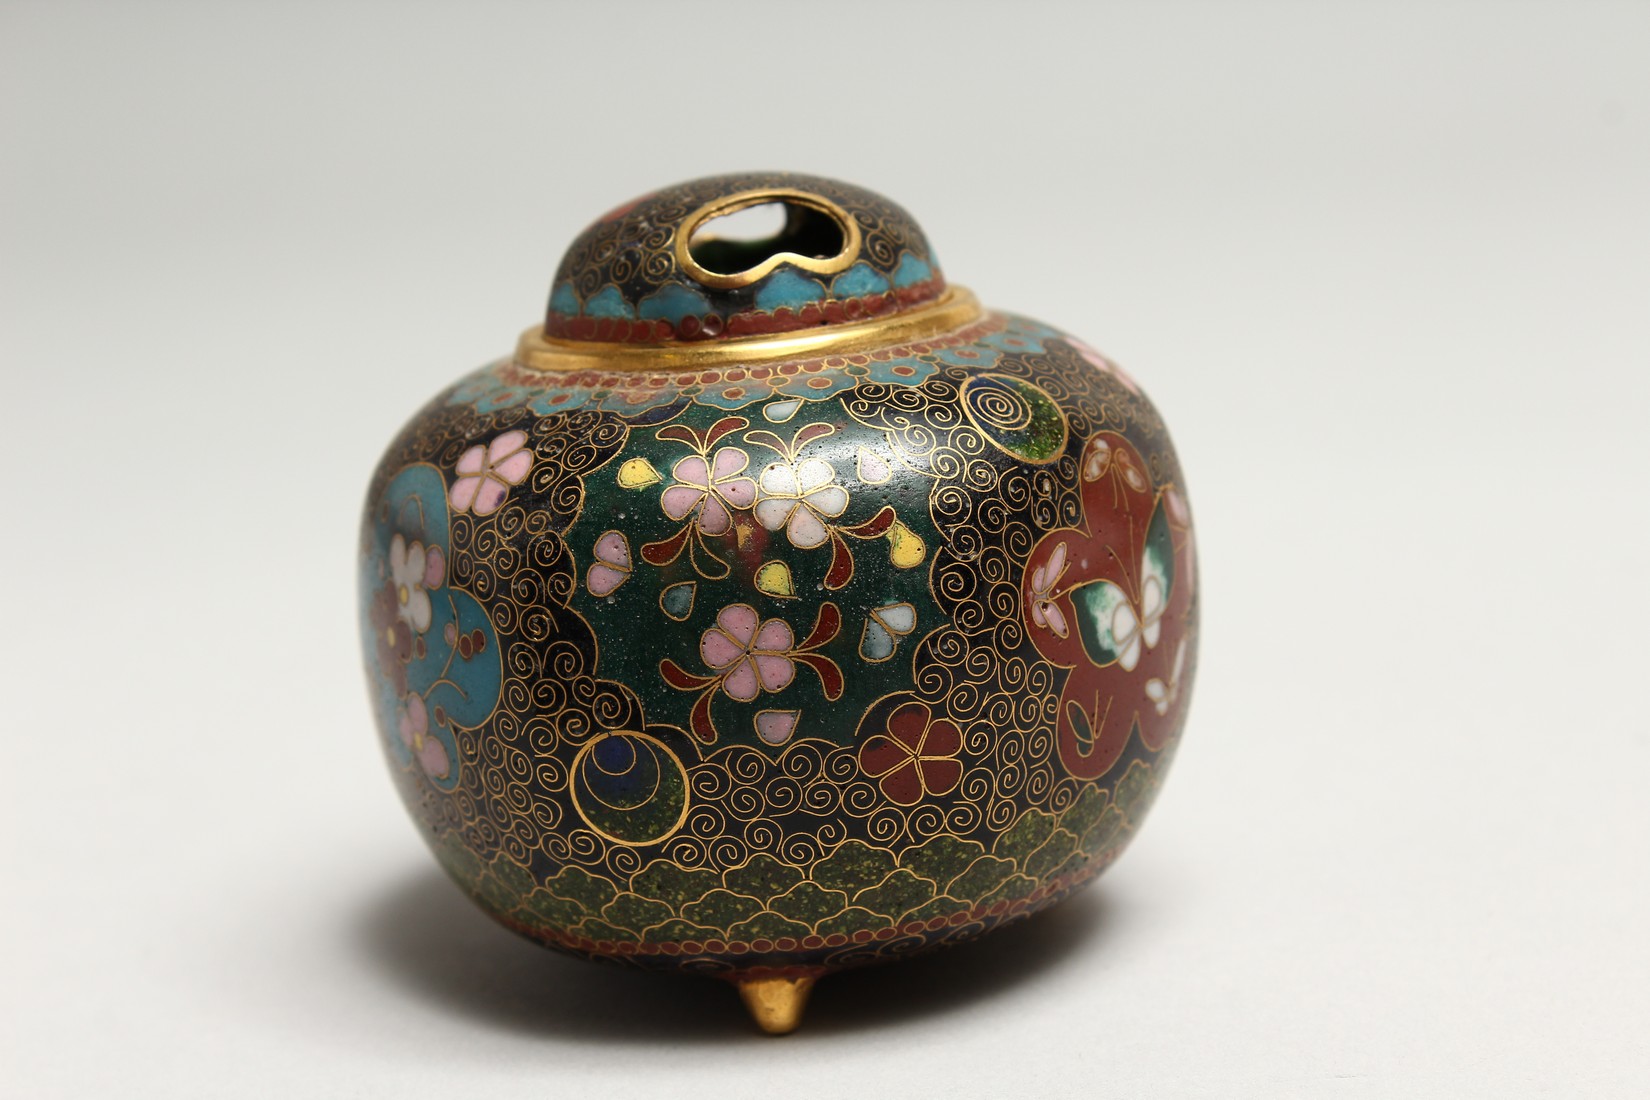 A JAPANESE CLOISSONE ENAMEL CENSER with panels of flowers and butterflies 3ins high - Image 4 of 7